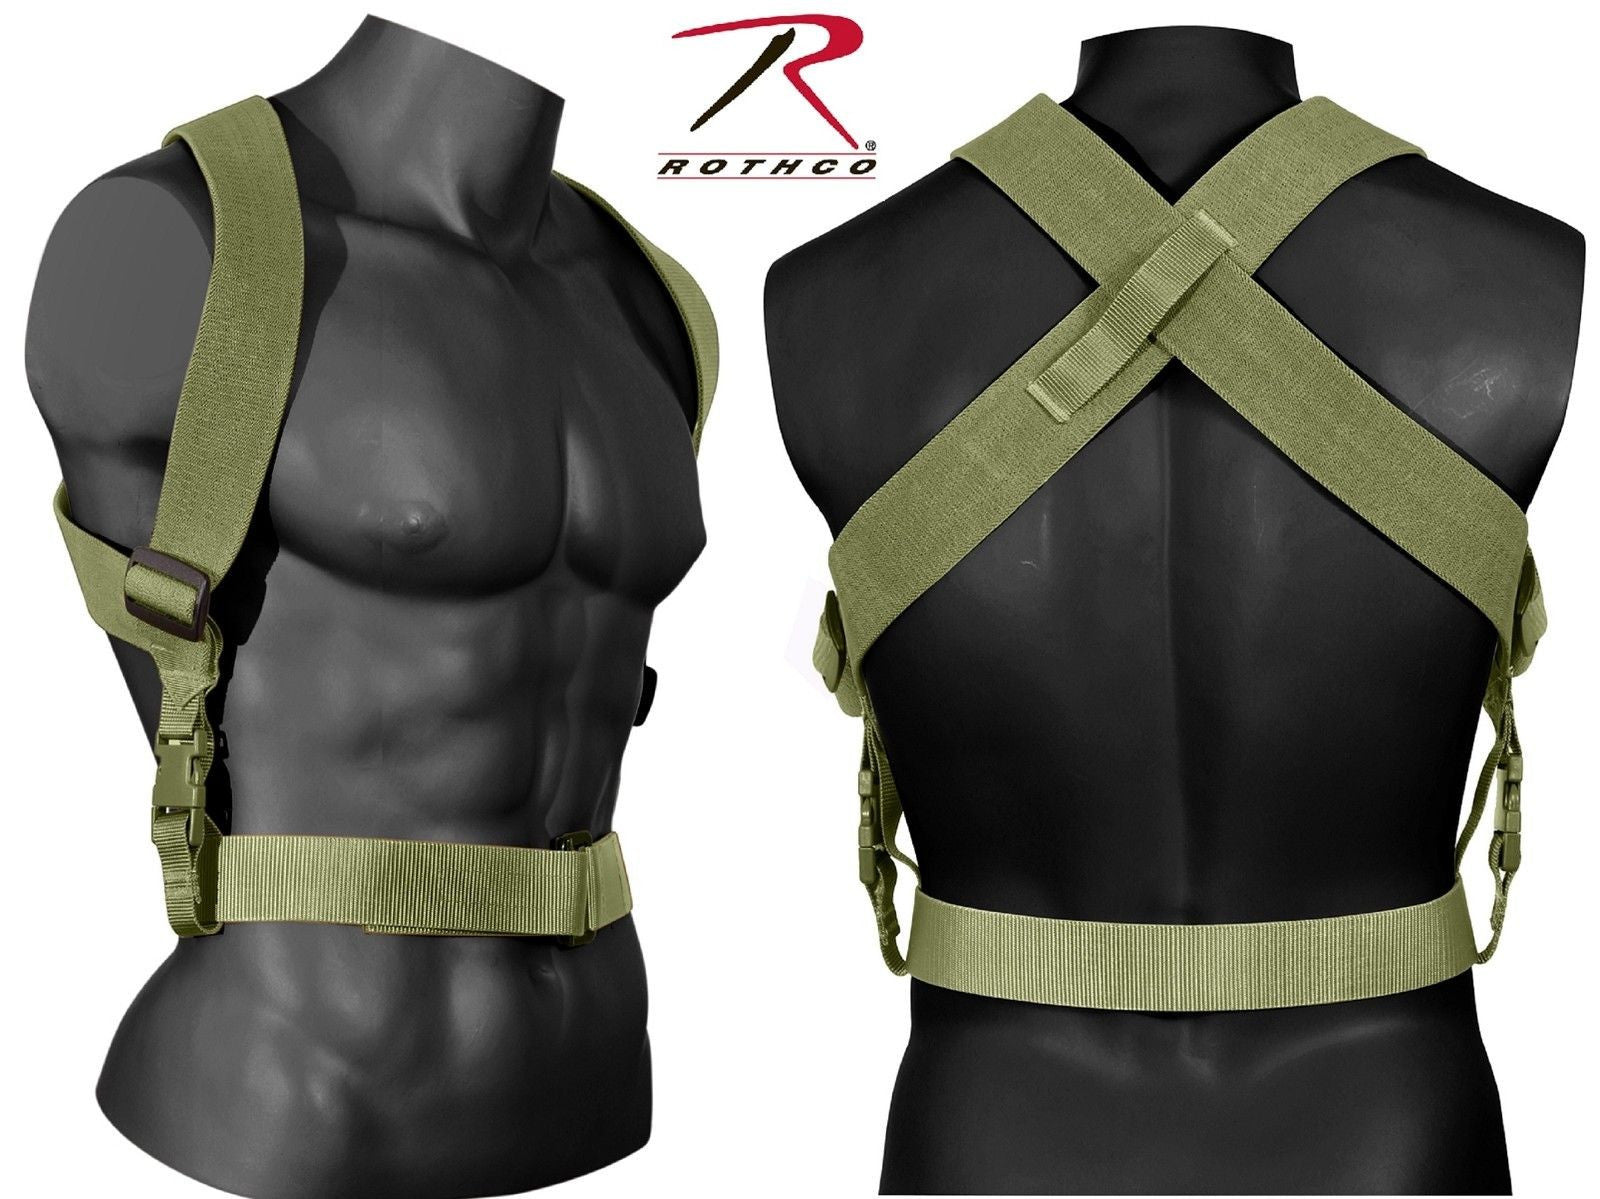 Olive Drab Tactical Combat Suspenders - Rothco Adjustable Gear